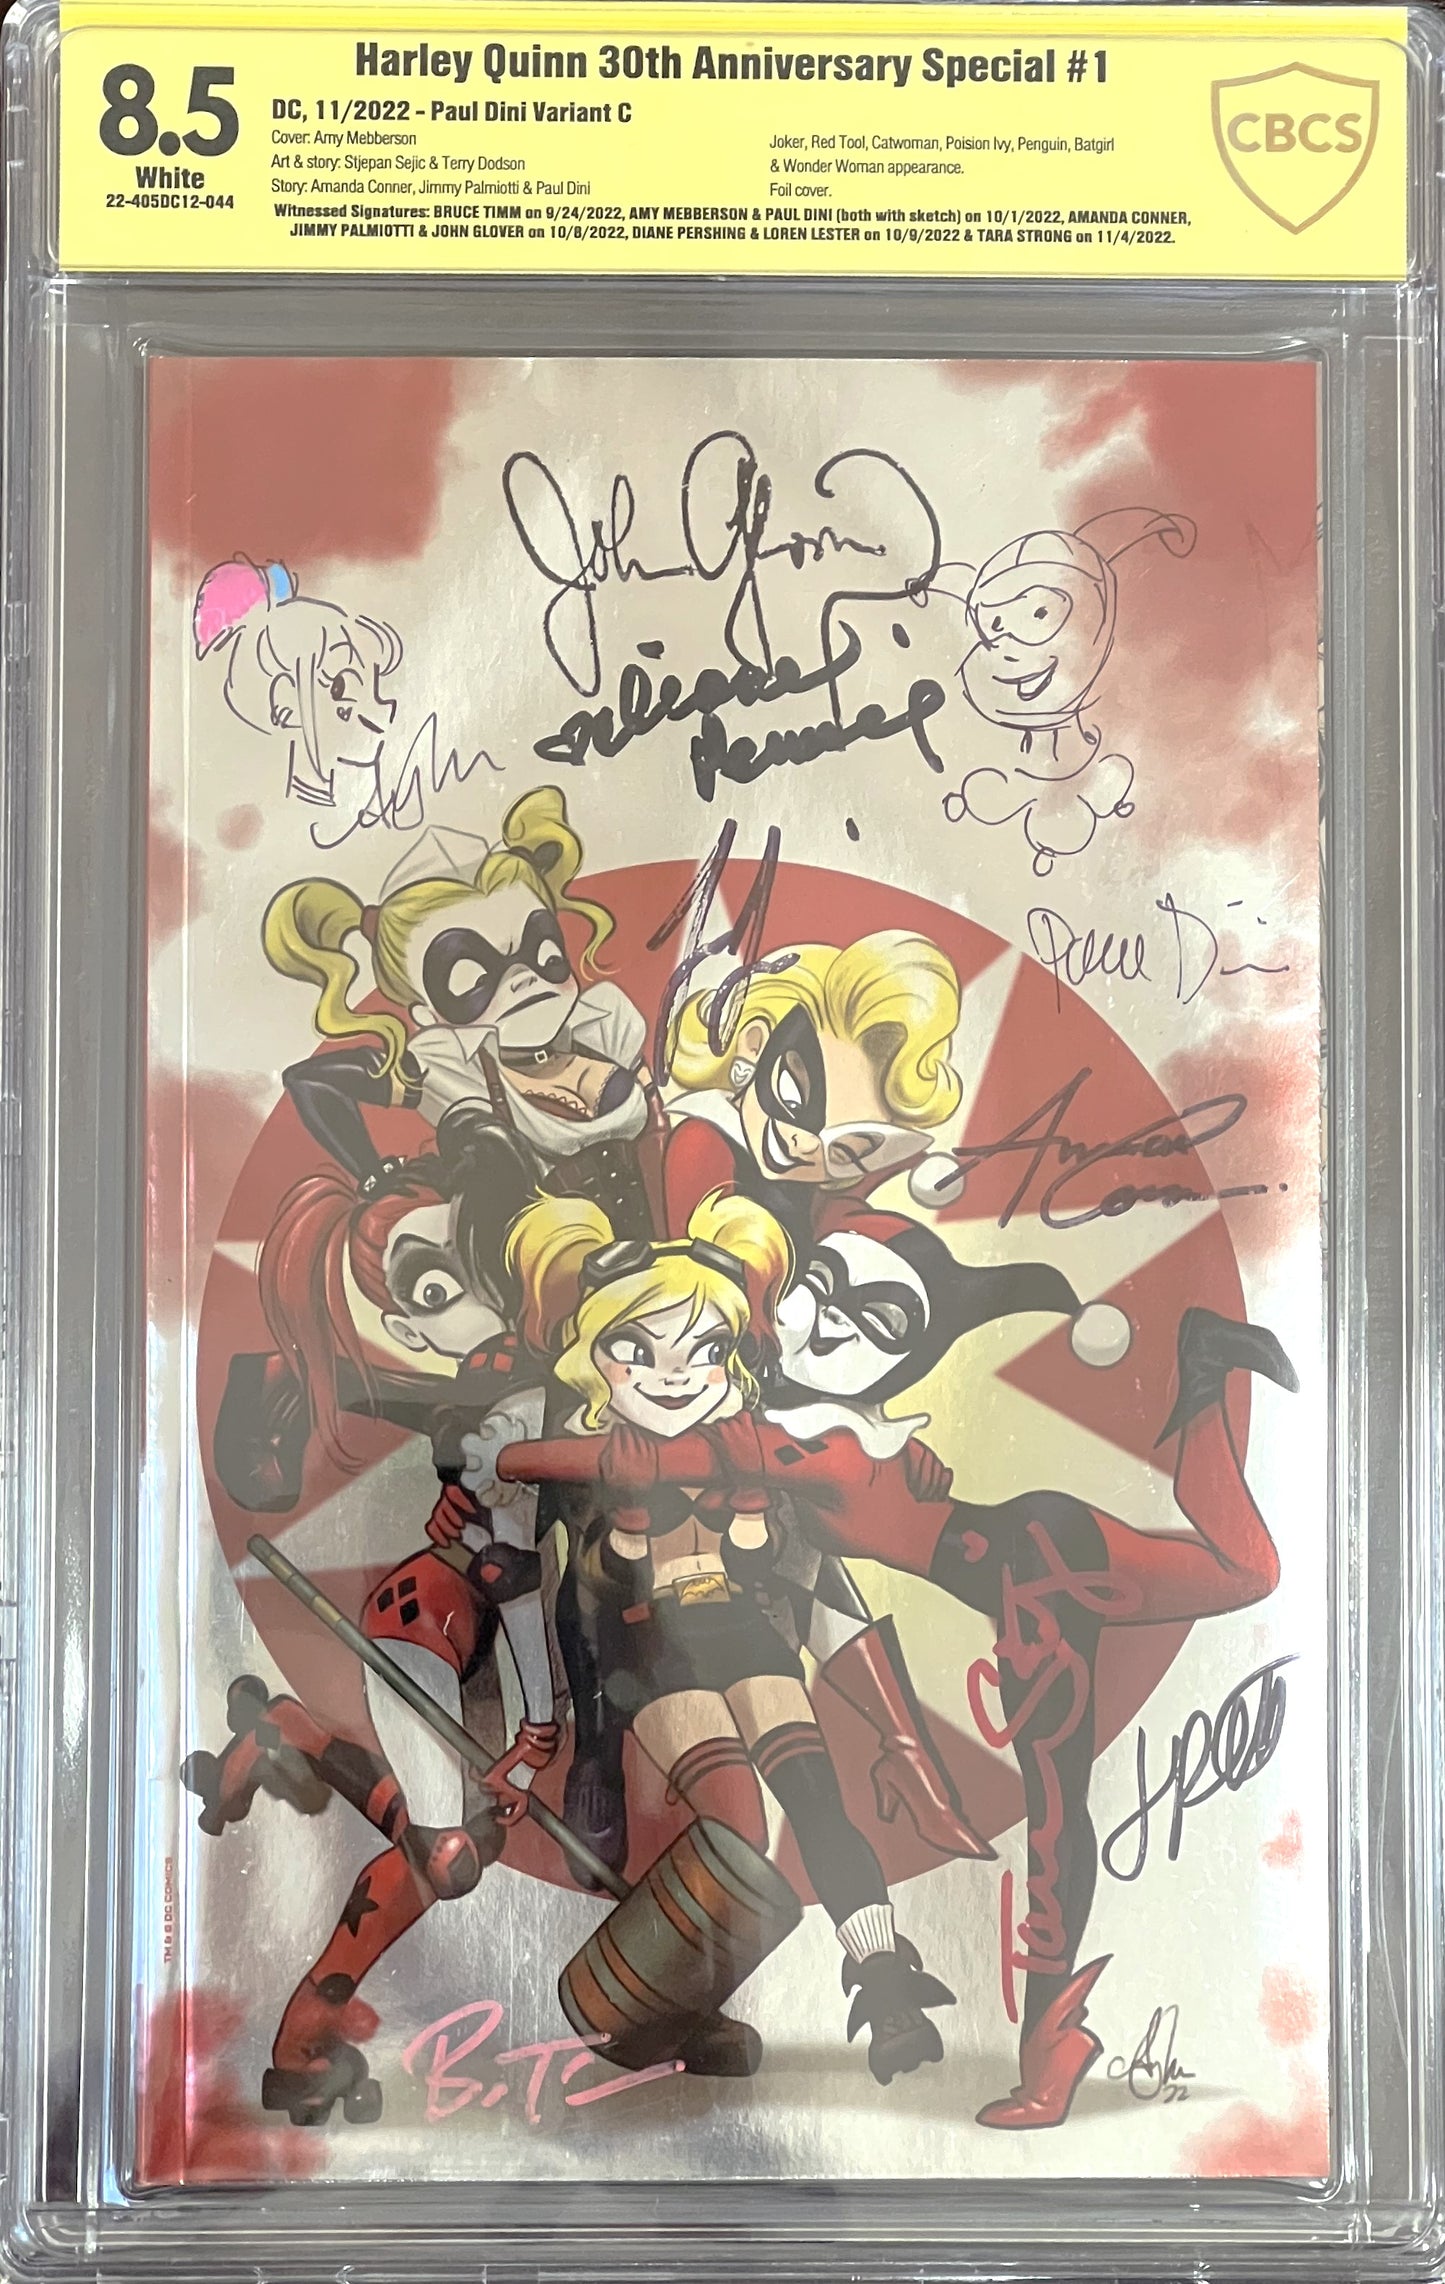 Harley Quinn 30th Anniversary Special #1. Paul Dini Variant. CBCS 8.5